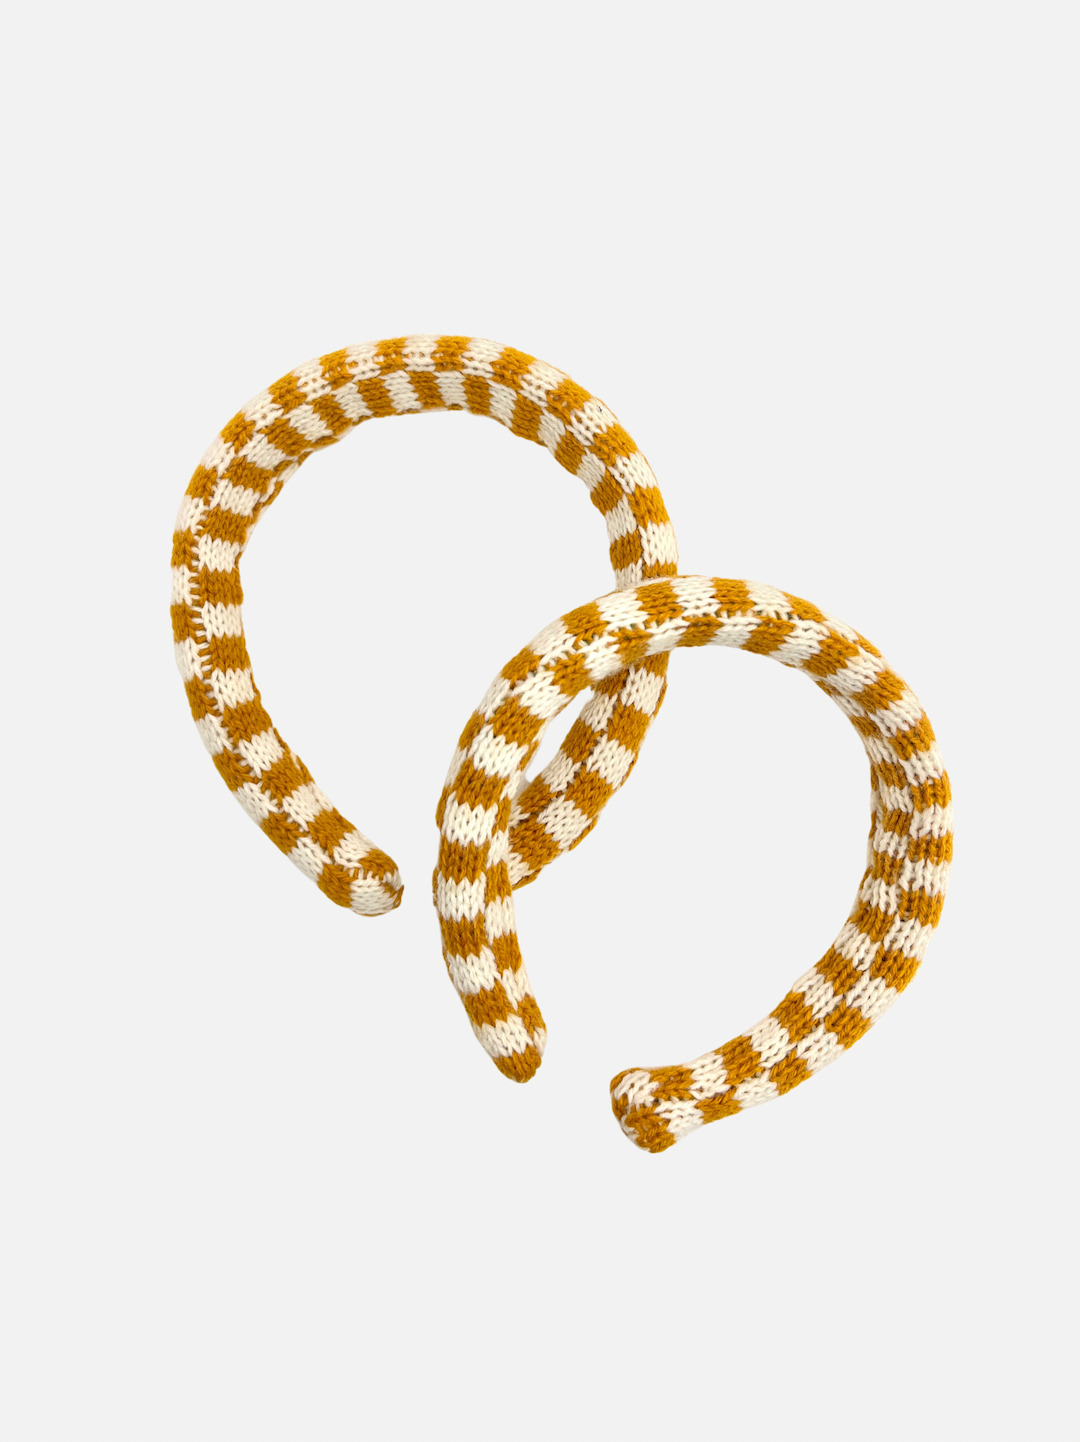 Ochre Checks | Two sizes of kids' knitted headband in an ochre and cream check